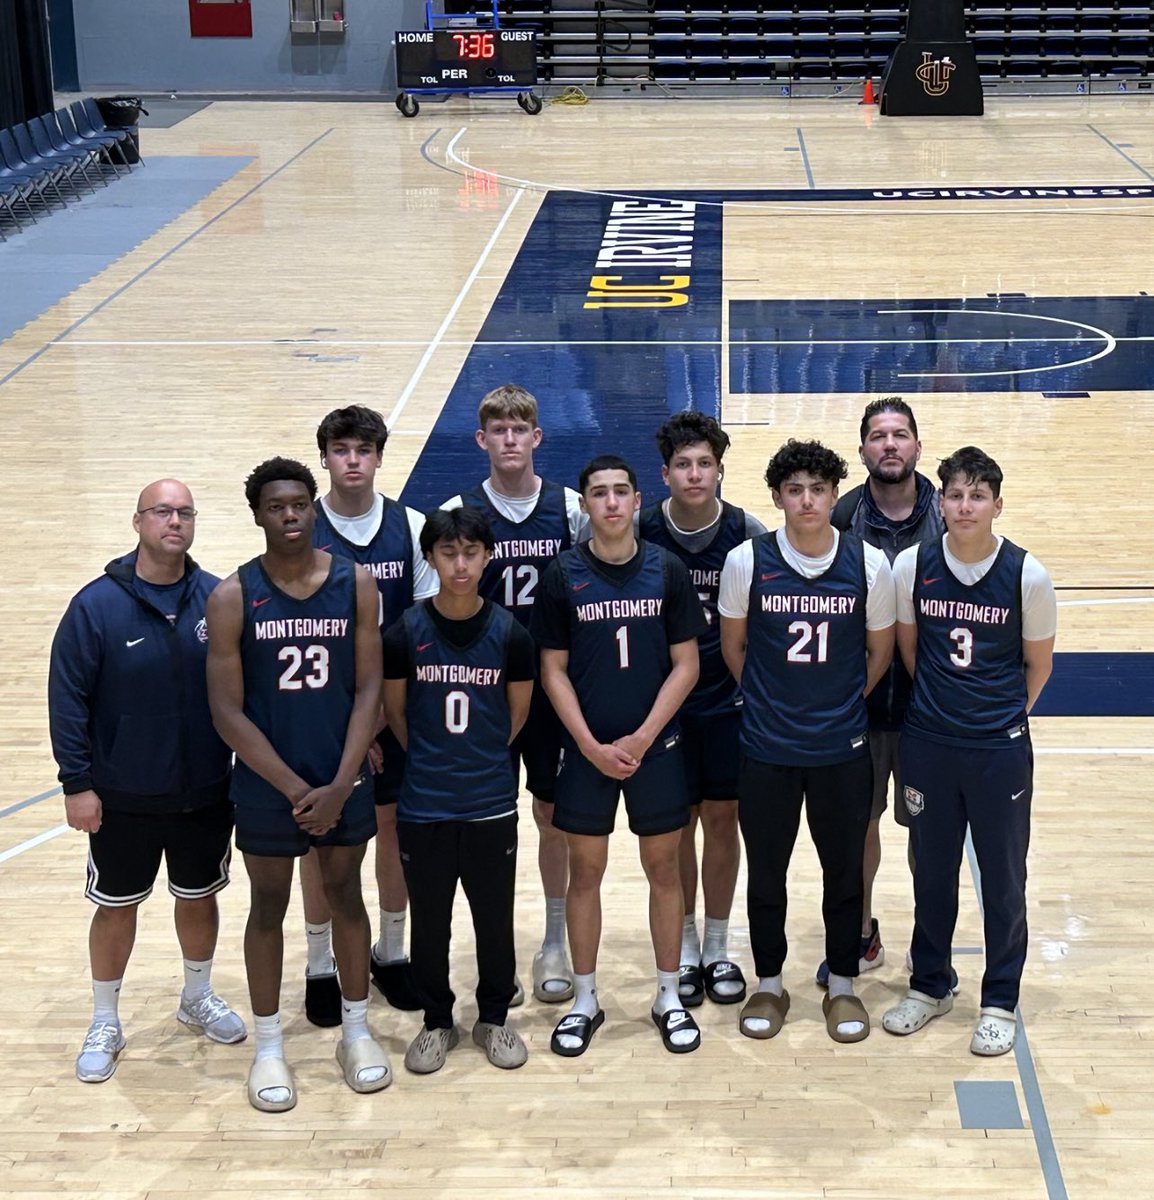 5-1 at the UC Irvine Team Camp vs. some really strong competition.  Thank you @UCImbb @coachwilder23 We got better this weekend!